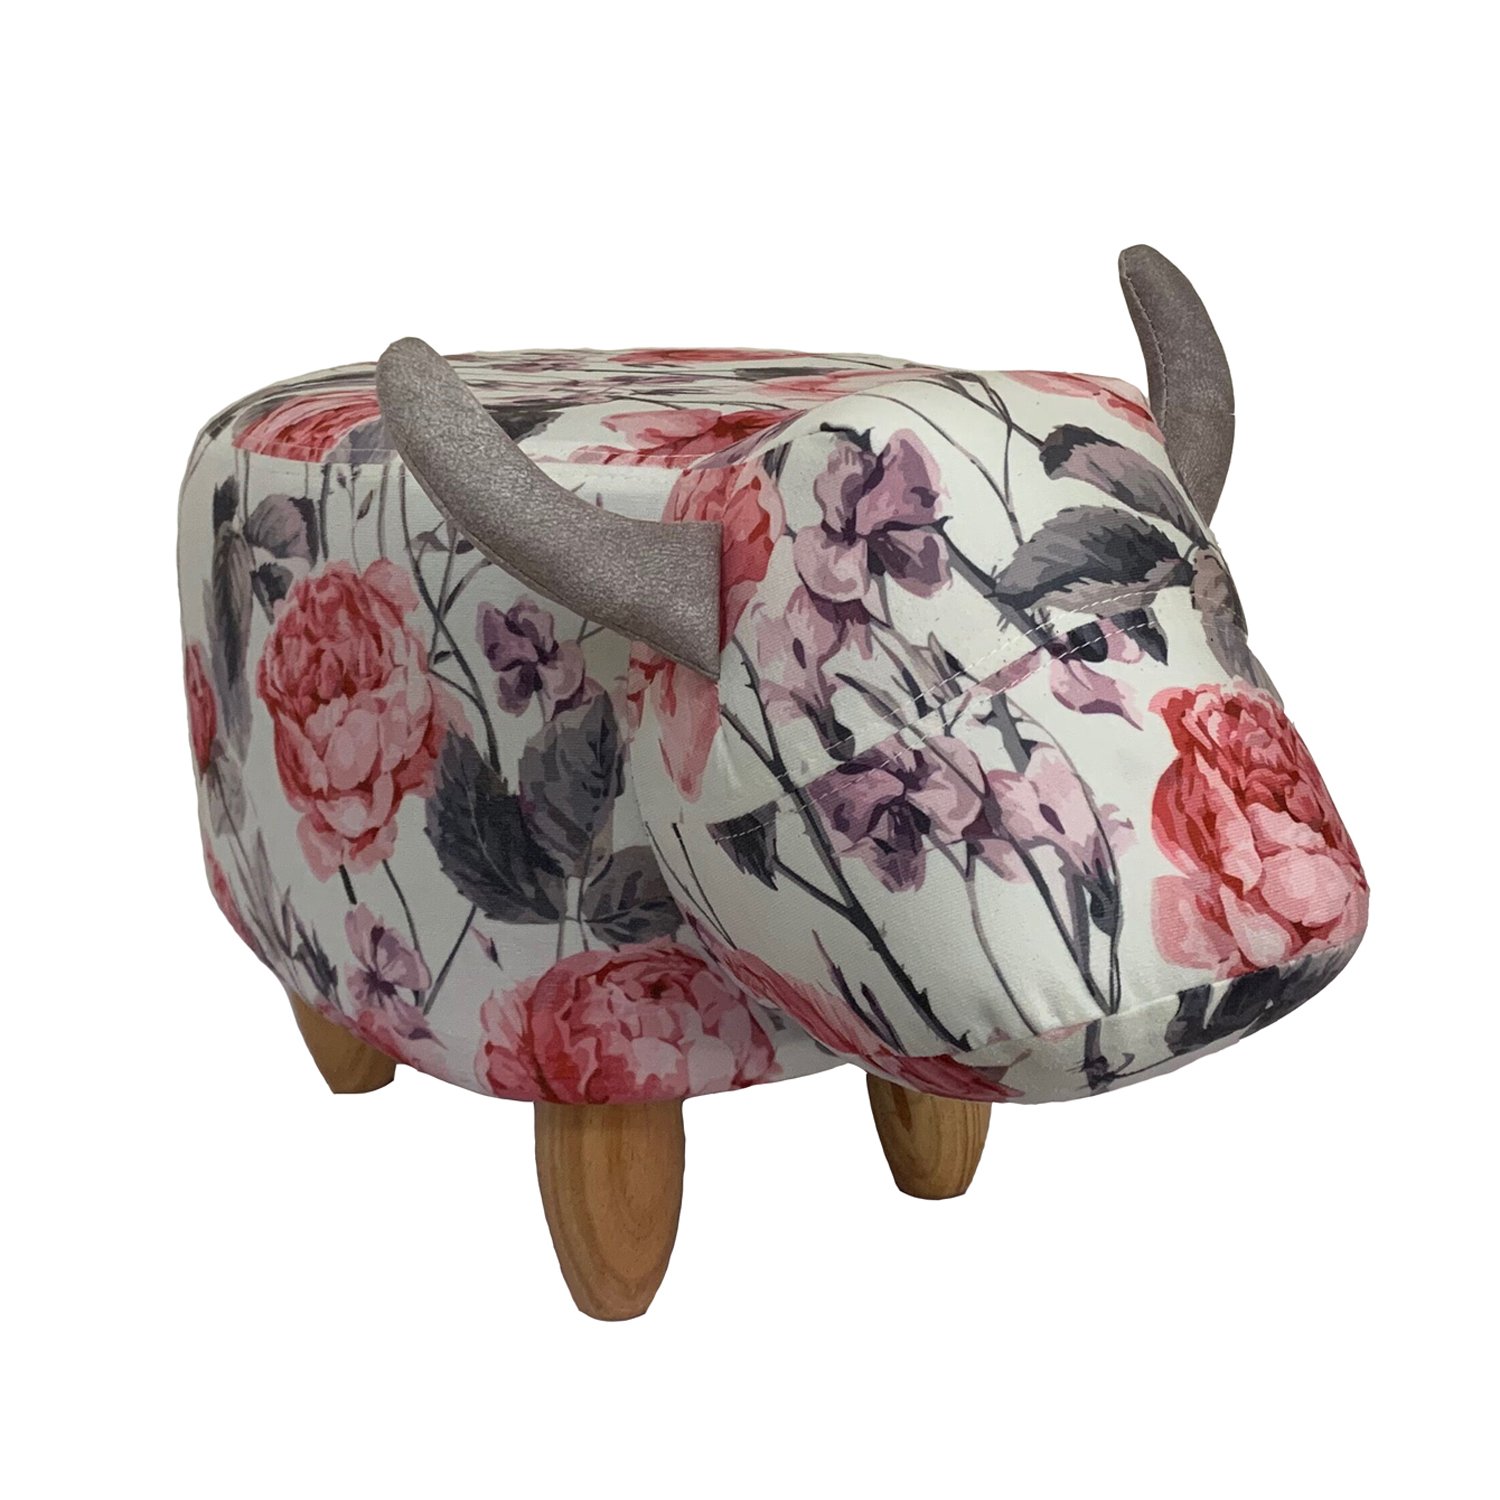 8.RED CANDY Florence the Flower Cow Footstool €69.25, 